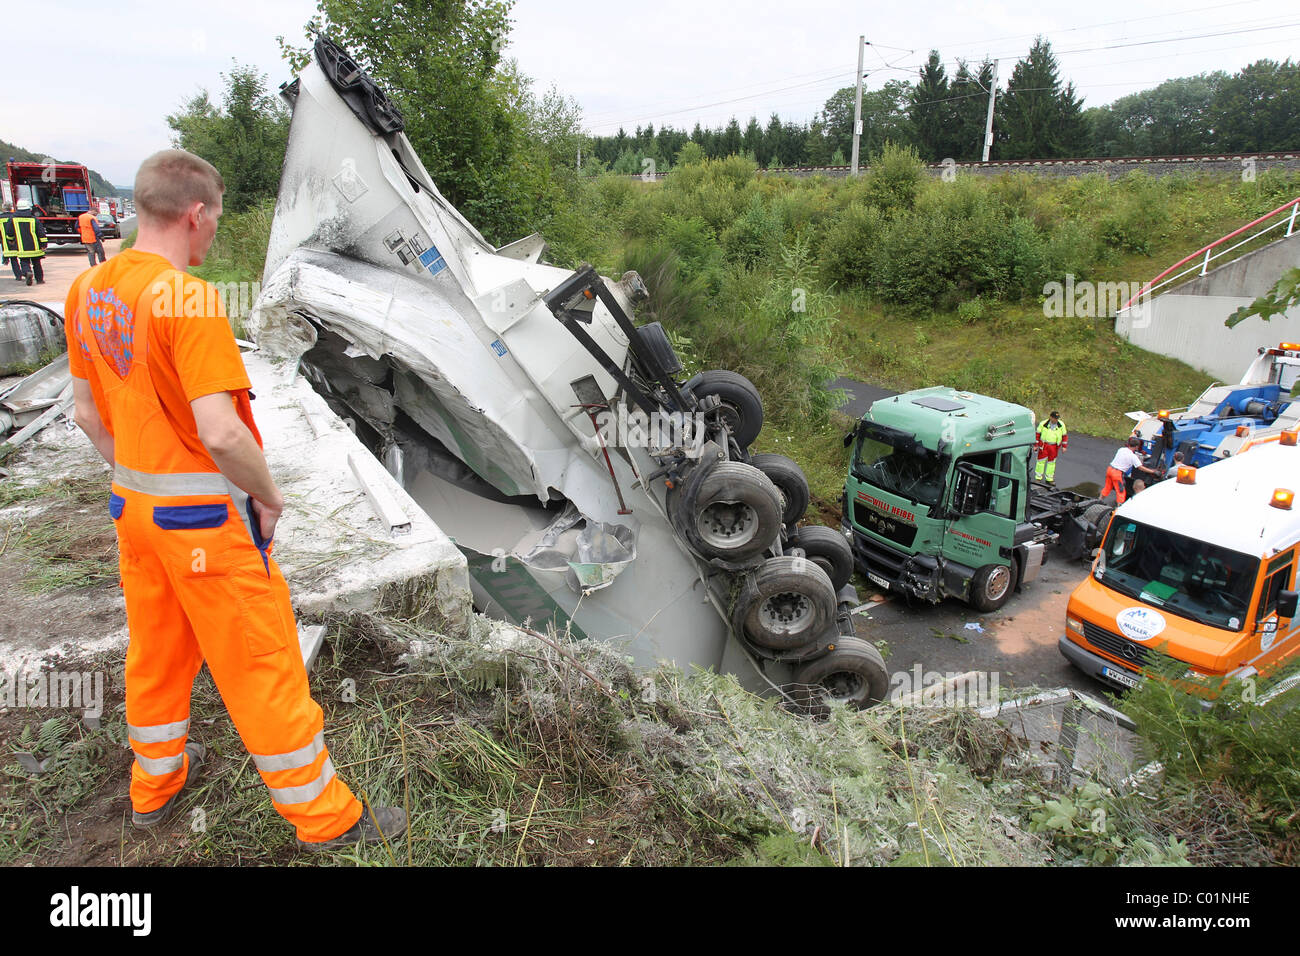 A silo truck has broken through the crash barrier of the A3 motorway and fallen on the K119 country road, Sessenhausen Stock Photo